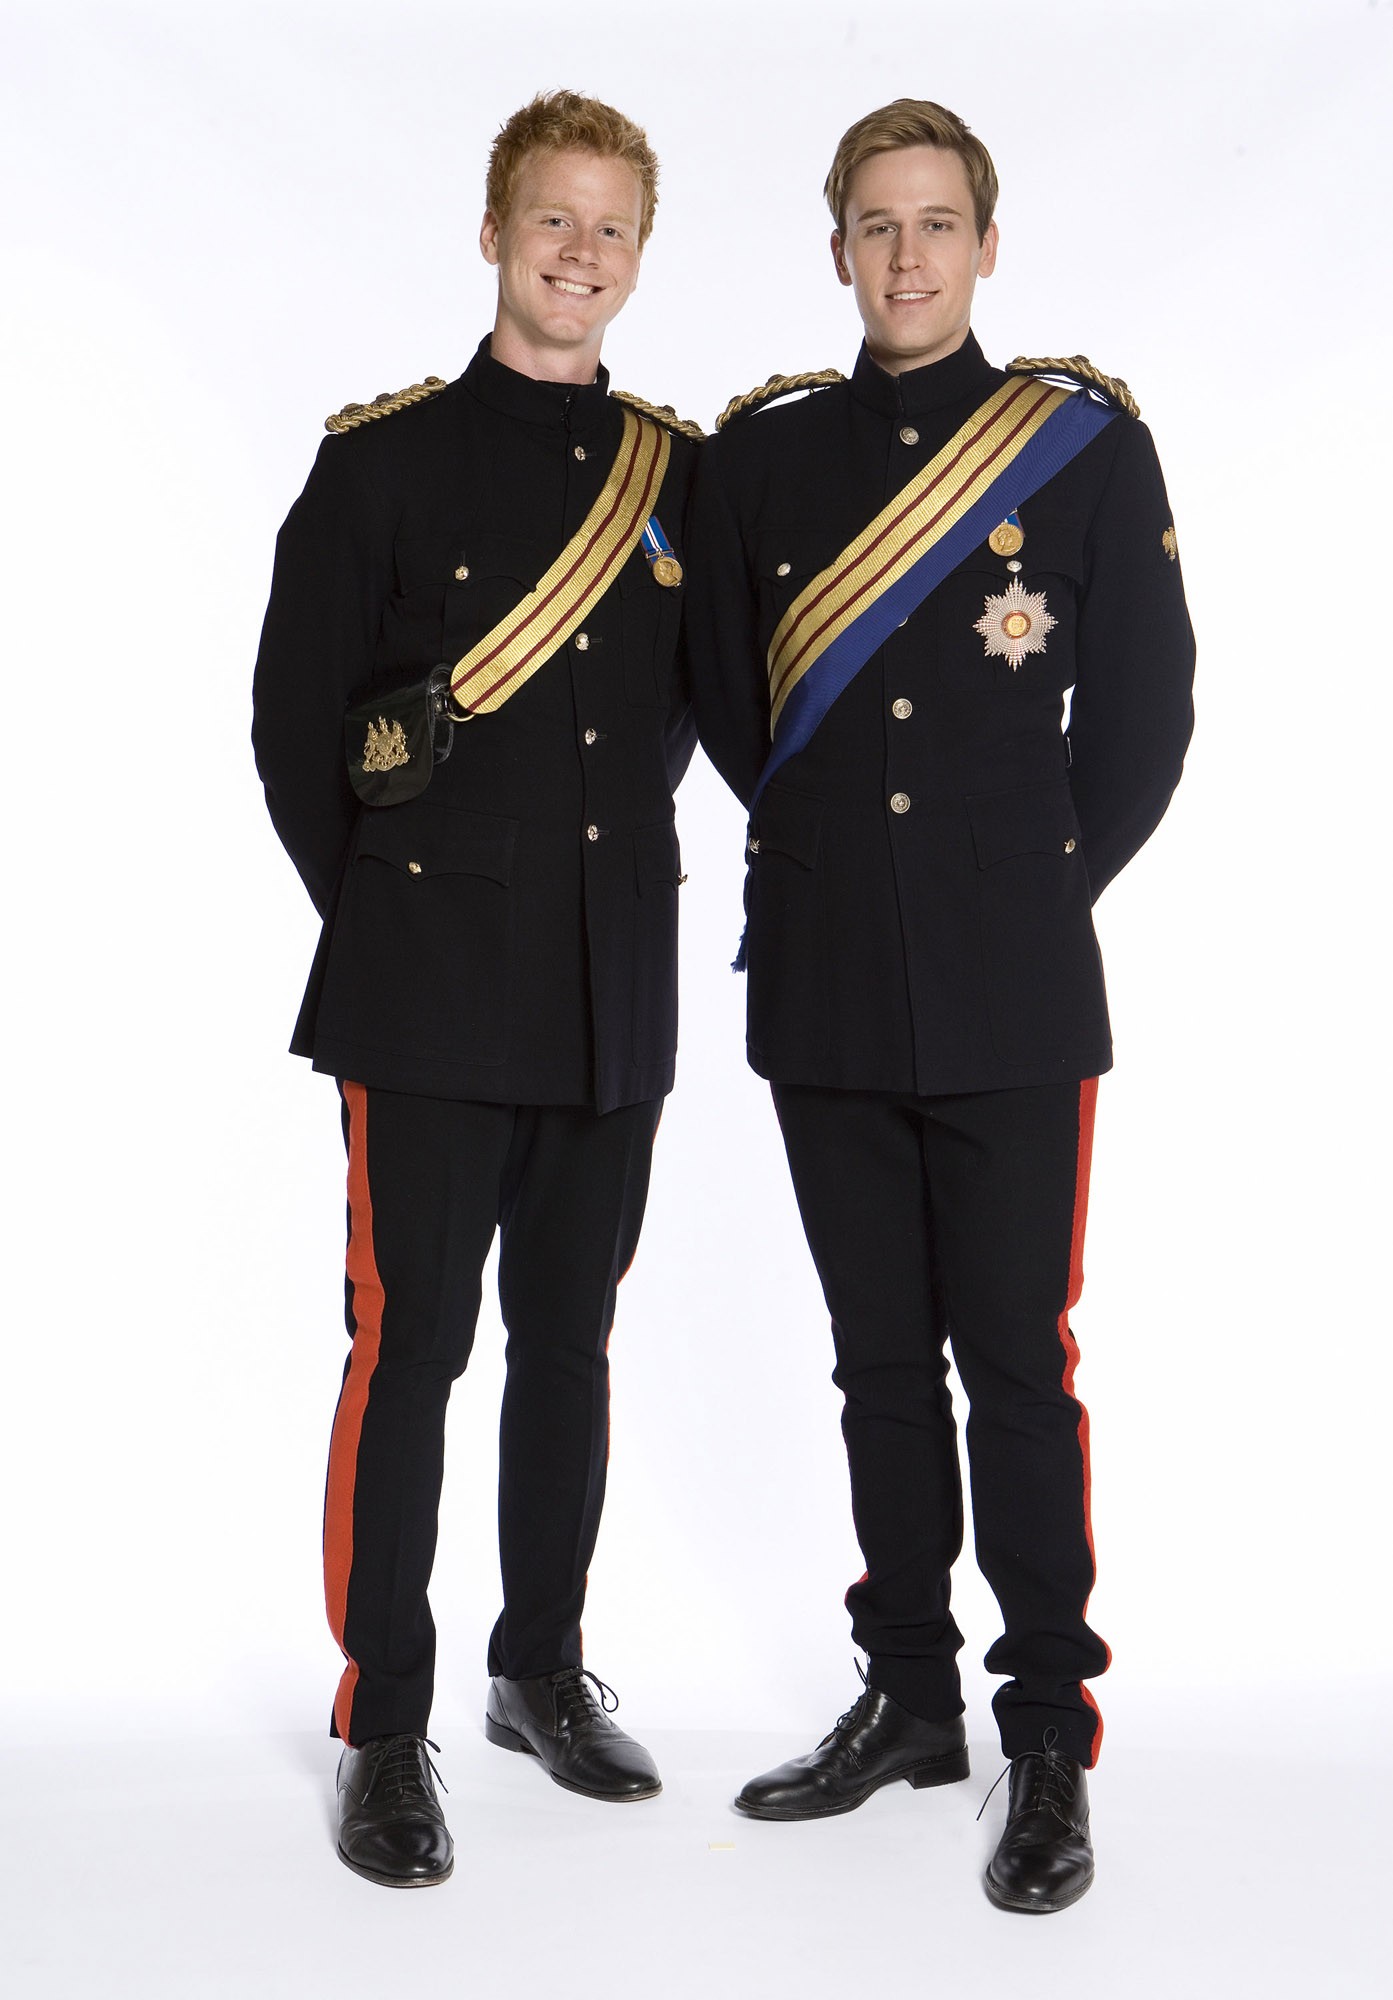 Stanley Eldridge stars as HRH Prince Harry and Dan Amboyer stars as HRH Prince William of Wales in Hallmark Channel's William & Catherine: A Royal Romance (2011)